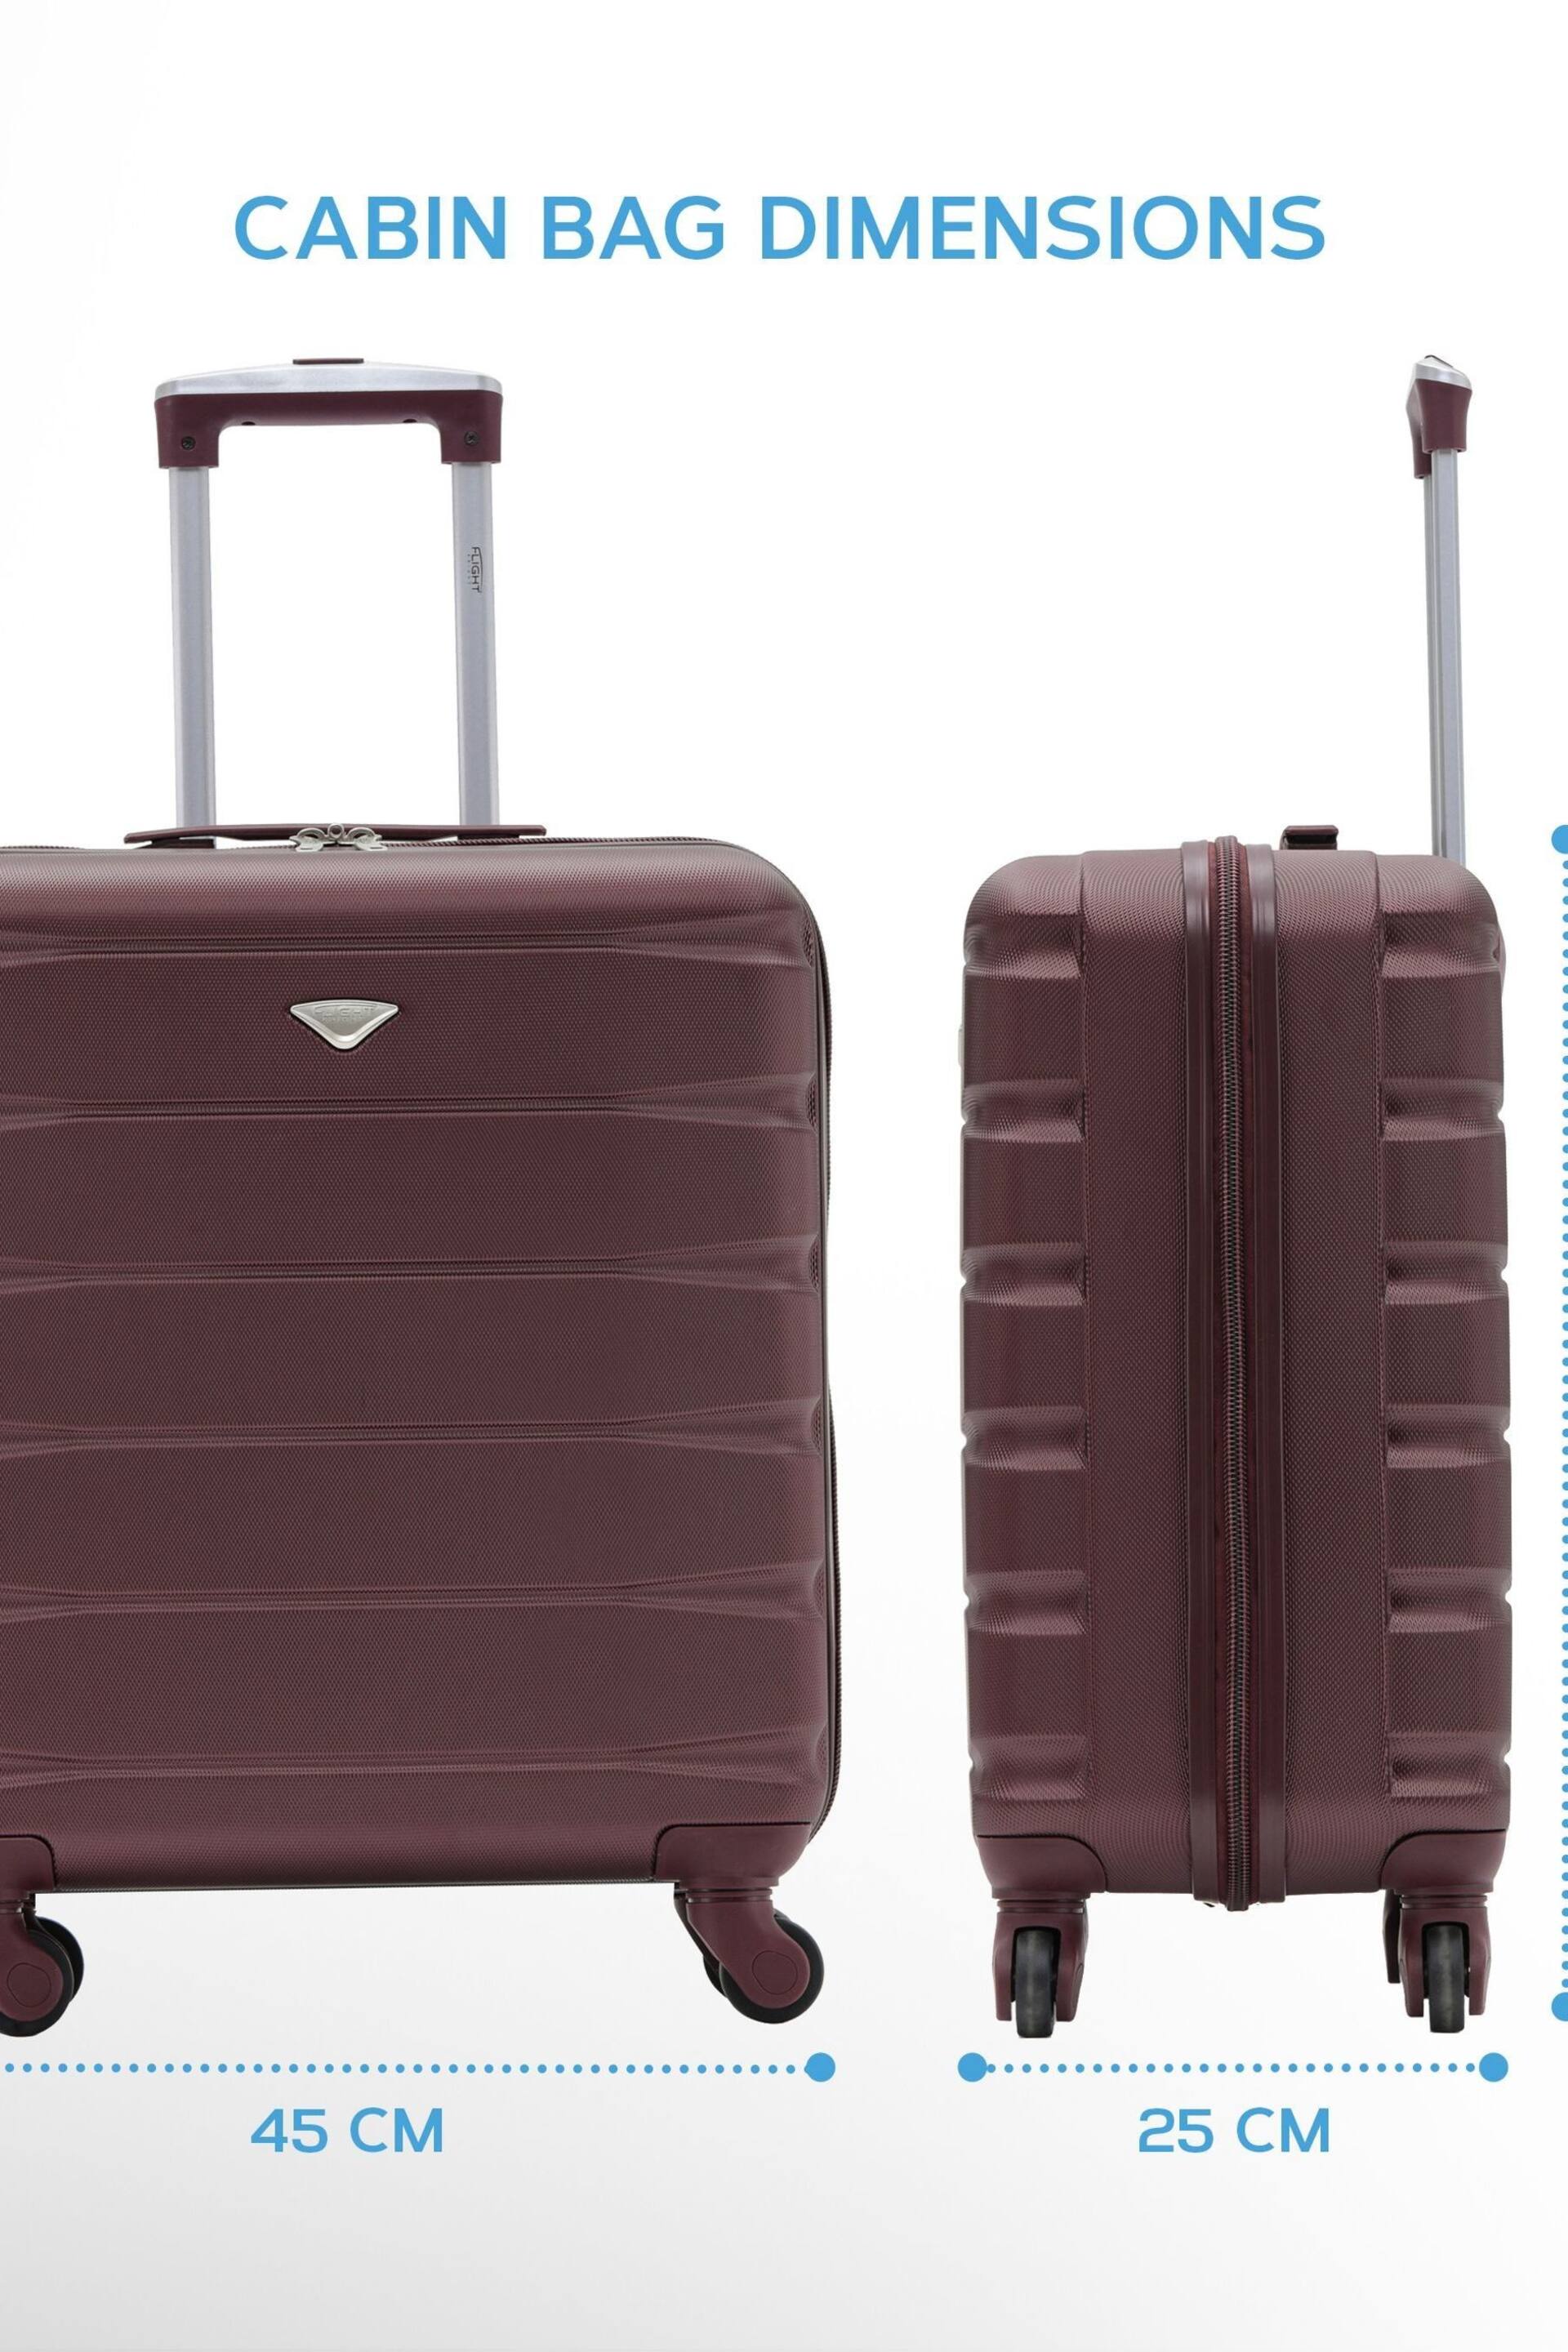 Flight Knight Burgundy + Burgundy EasyJet 56x45x25cm Overhead 4 Wheel ABS Hard Case Cabin Carry On Suitcase Set Of 2 - Image 6 of 8